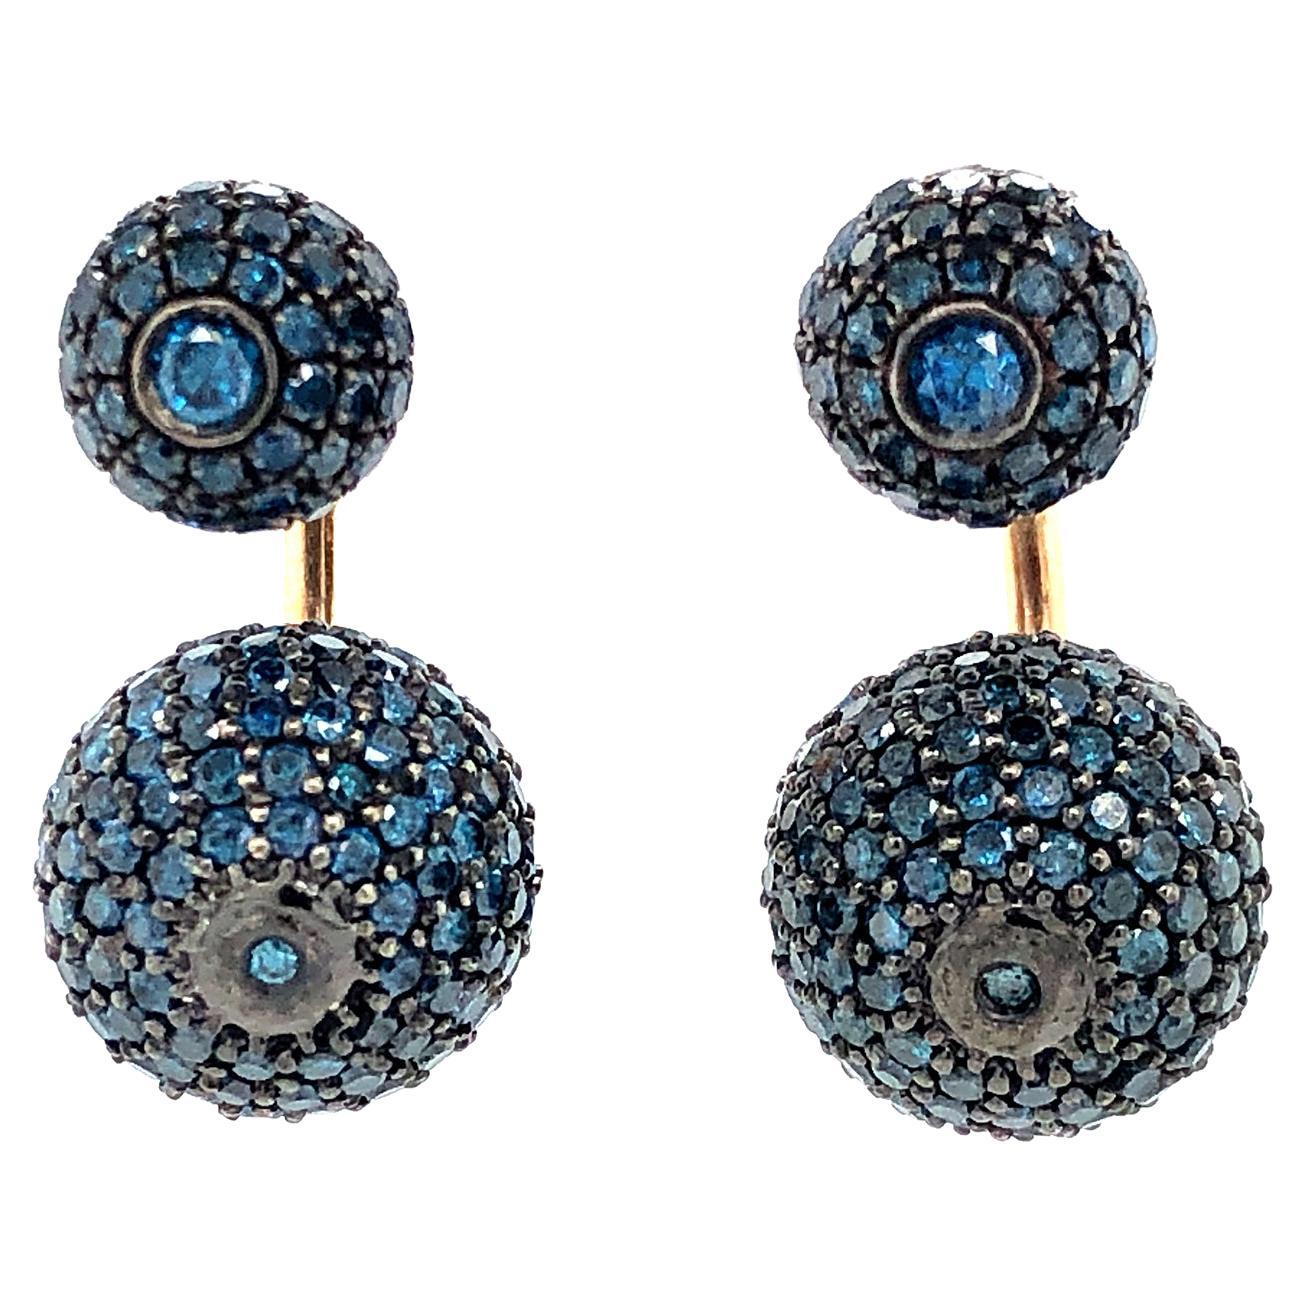 Blue Pave Diamond Ball Tunnel Earring Made in 14k Gold